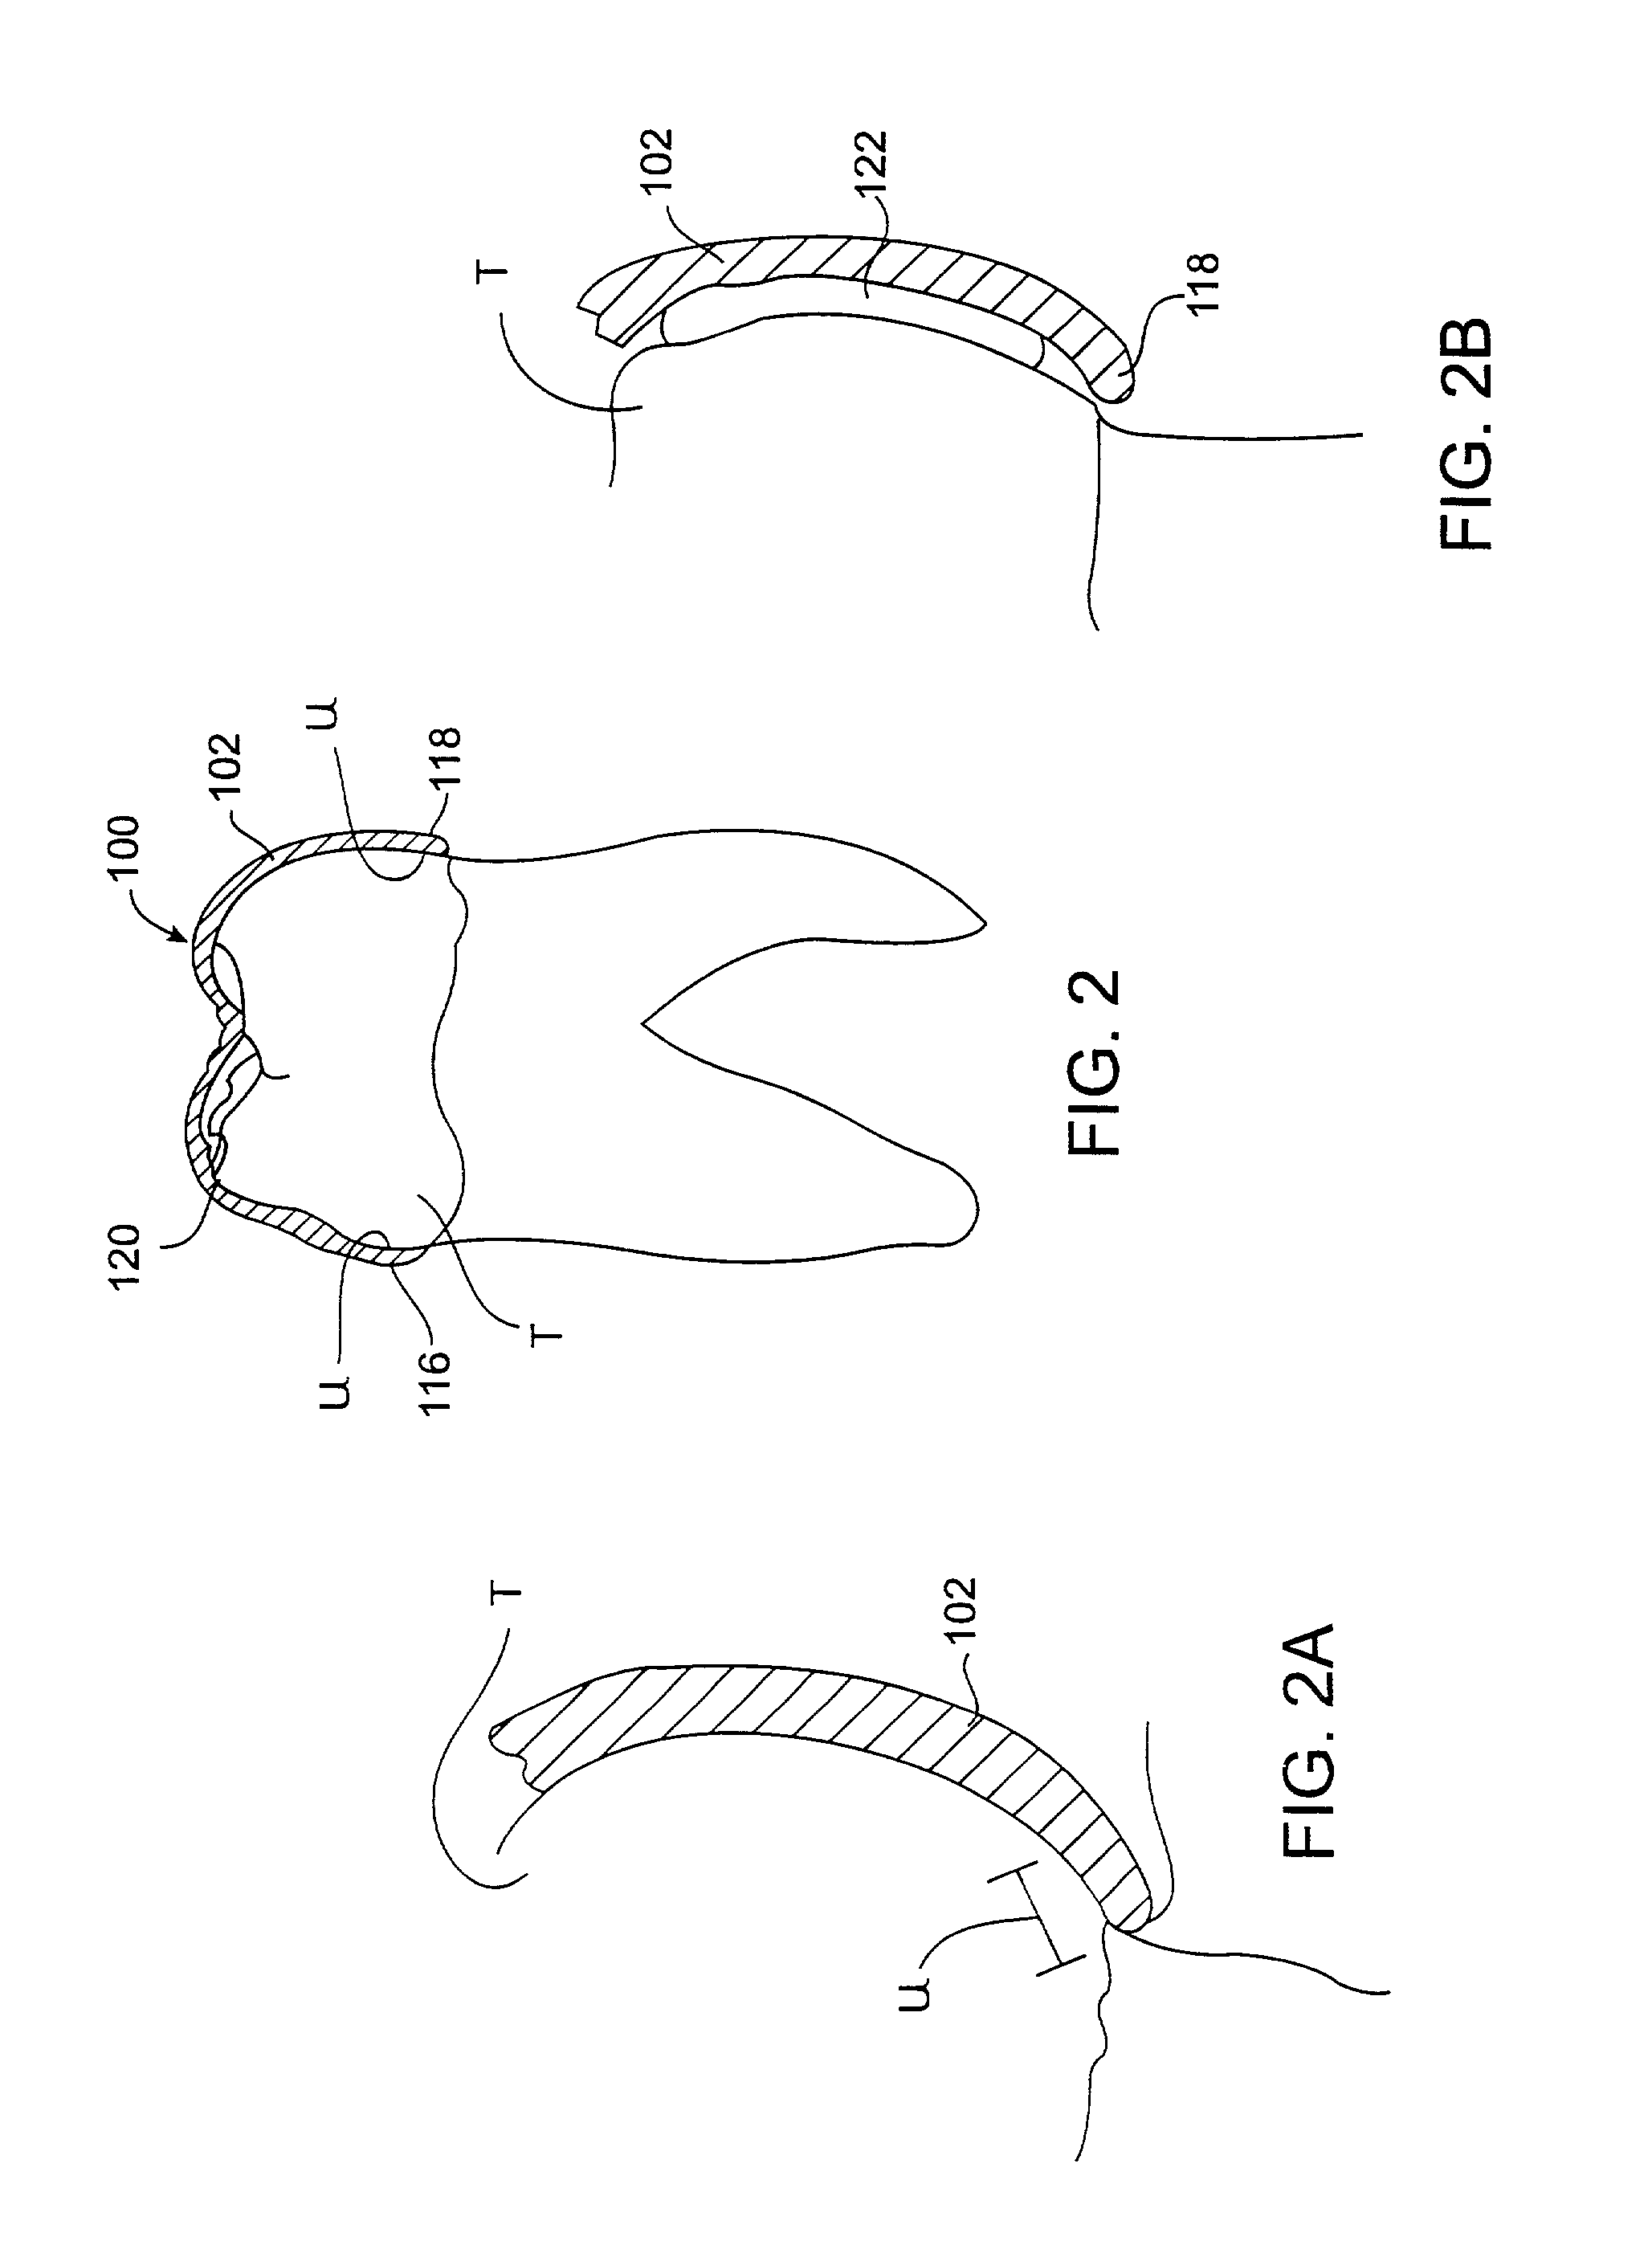 System and method for releasing tooth positioning appliances